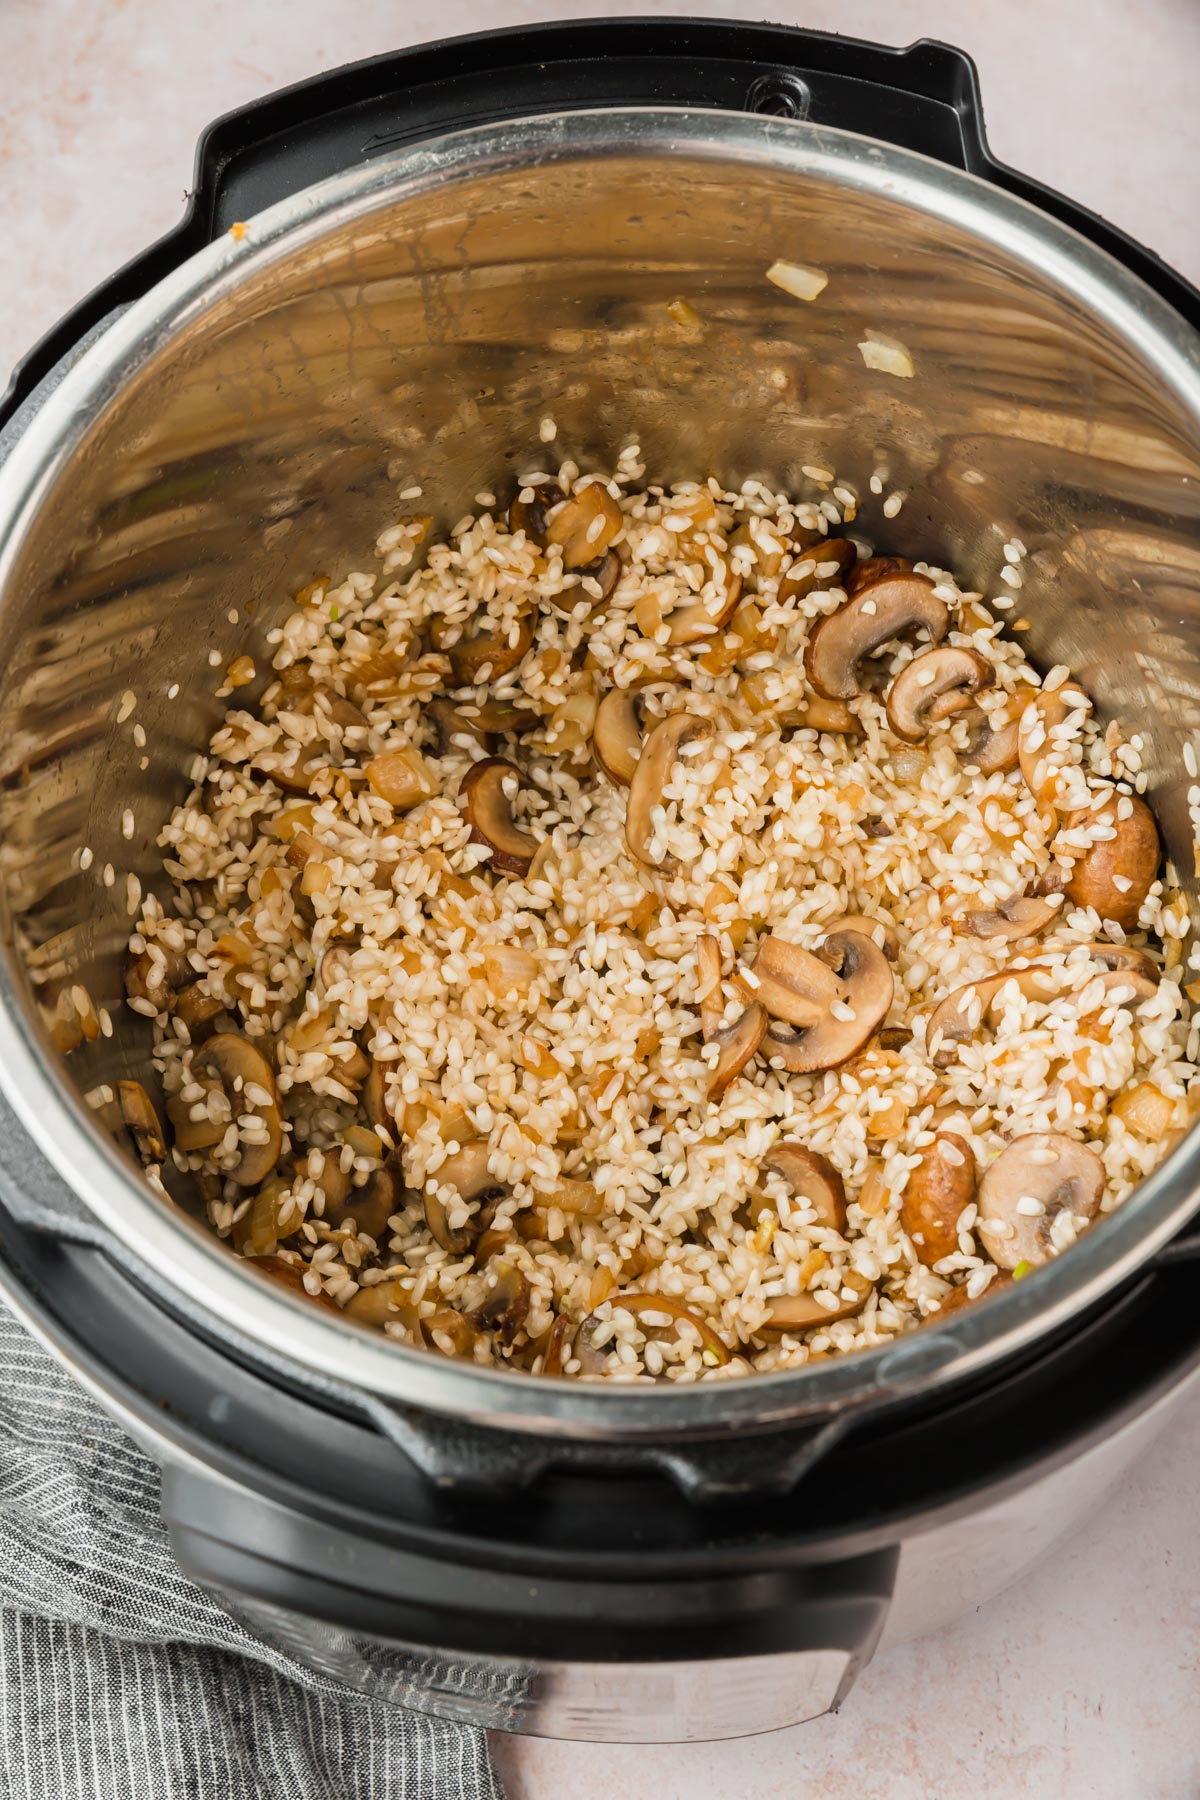 An Instant Pot filled with arborio rice and sautéed mushrooms.